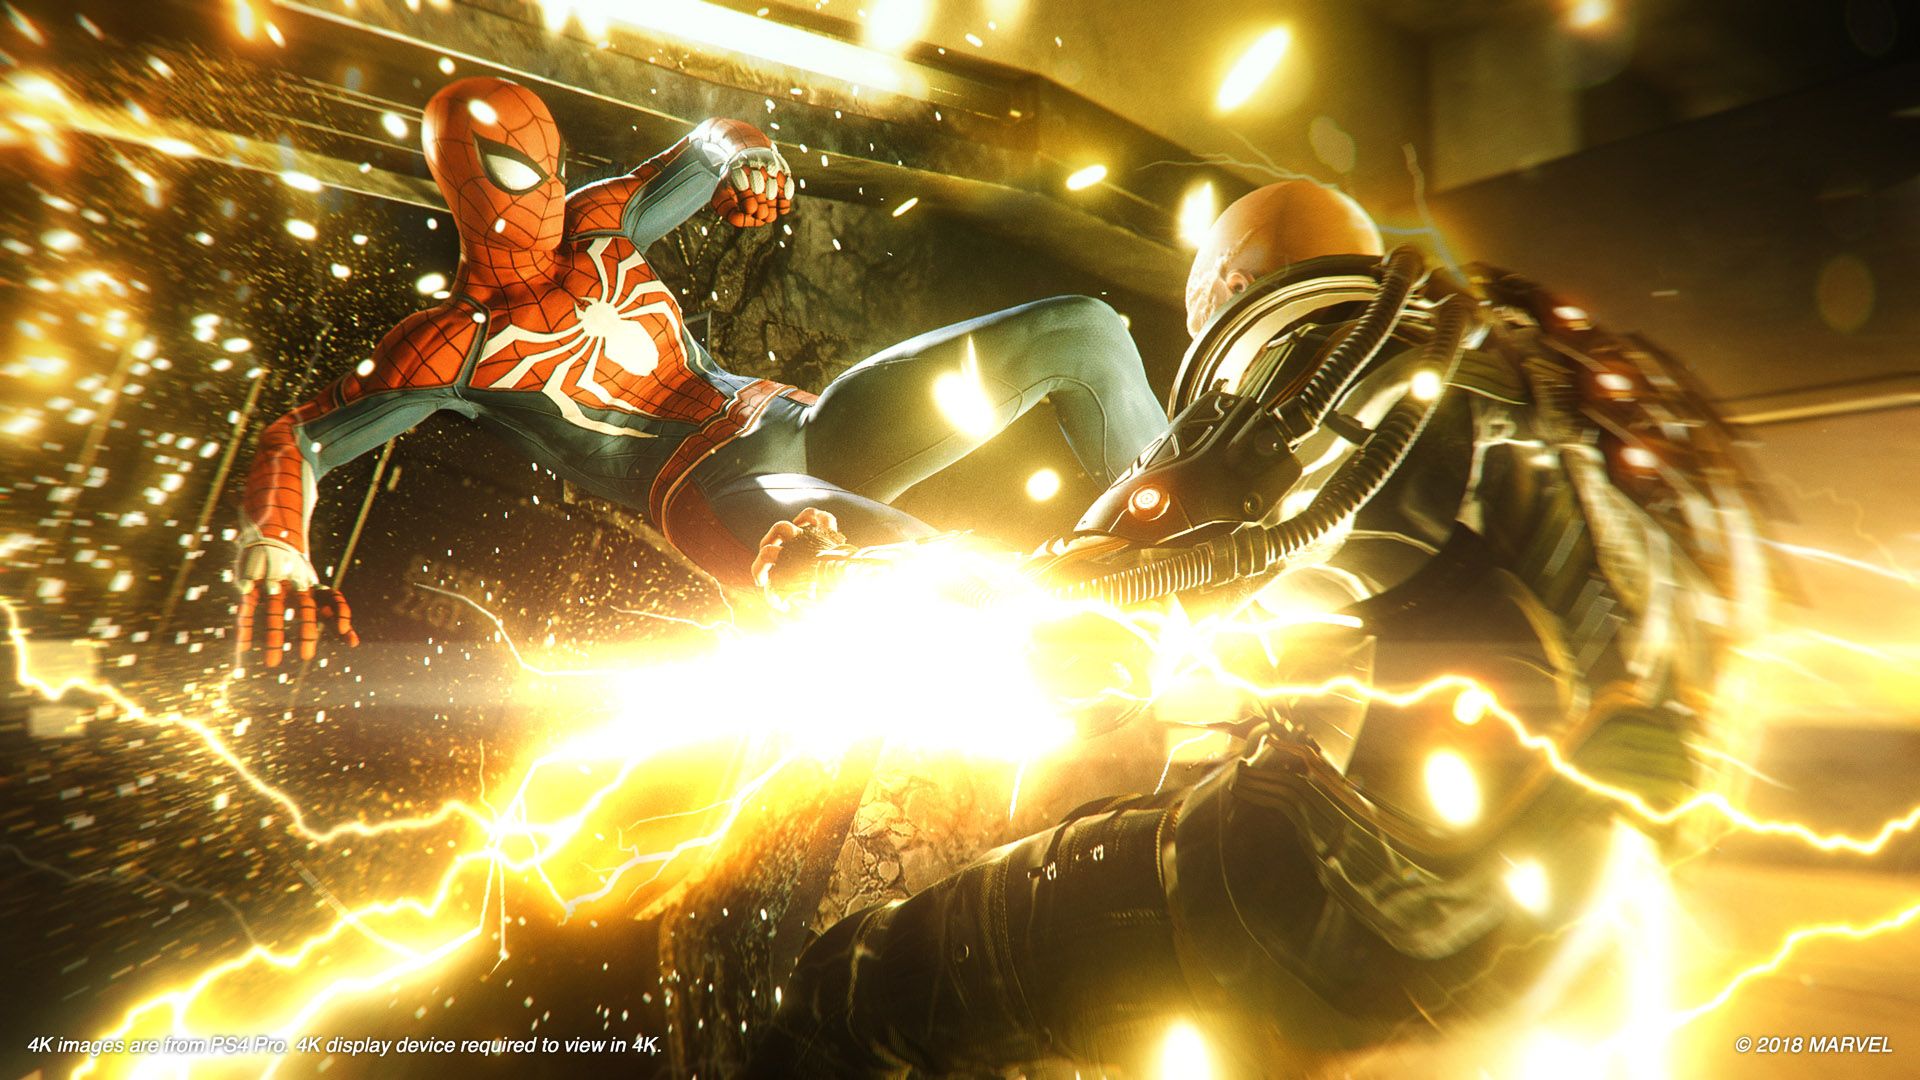 SpiderMan Gets Absolutely Rekt In Latest PS4 Gameplay Trailer